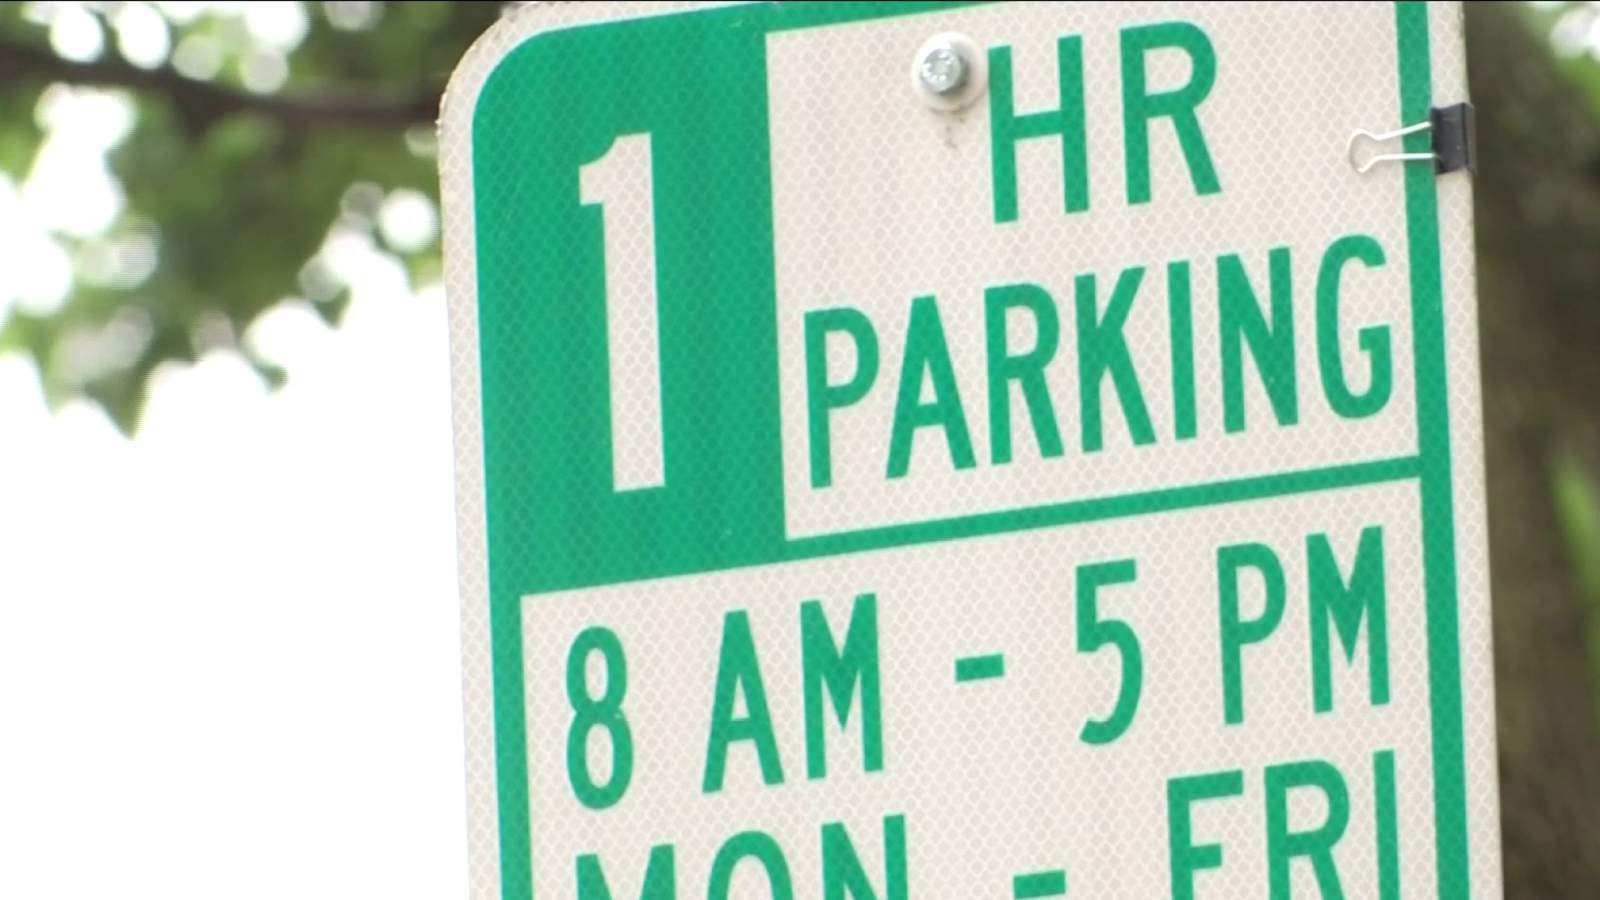 Parking tickets return to downtown Roanoke next month